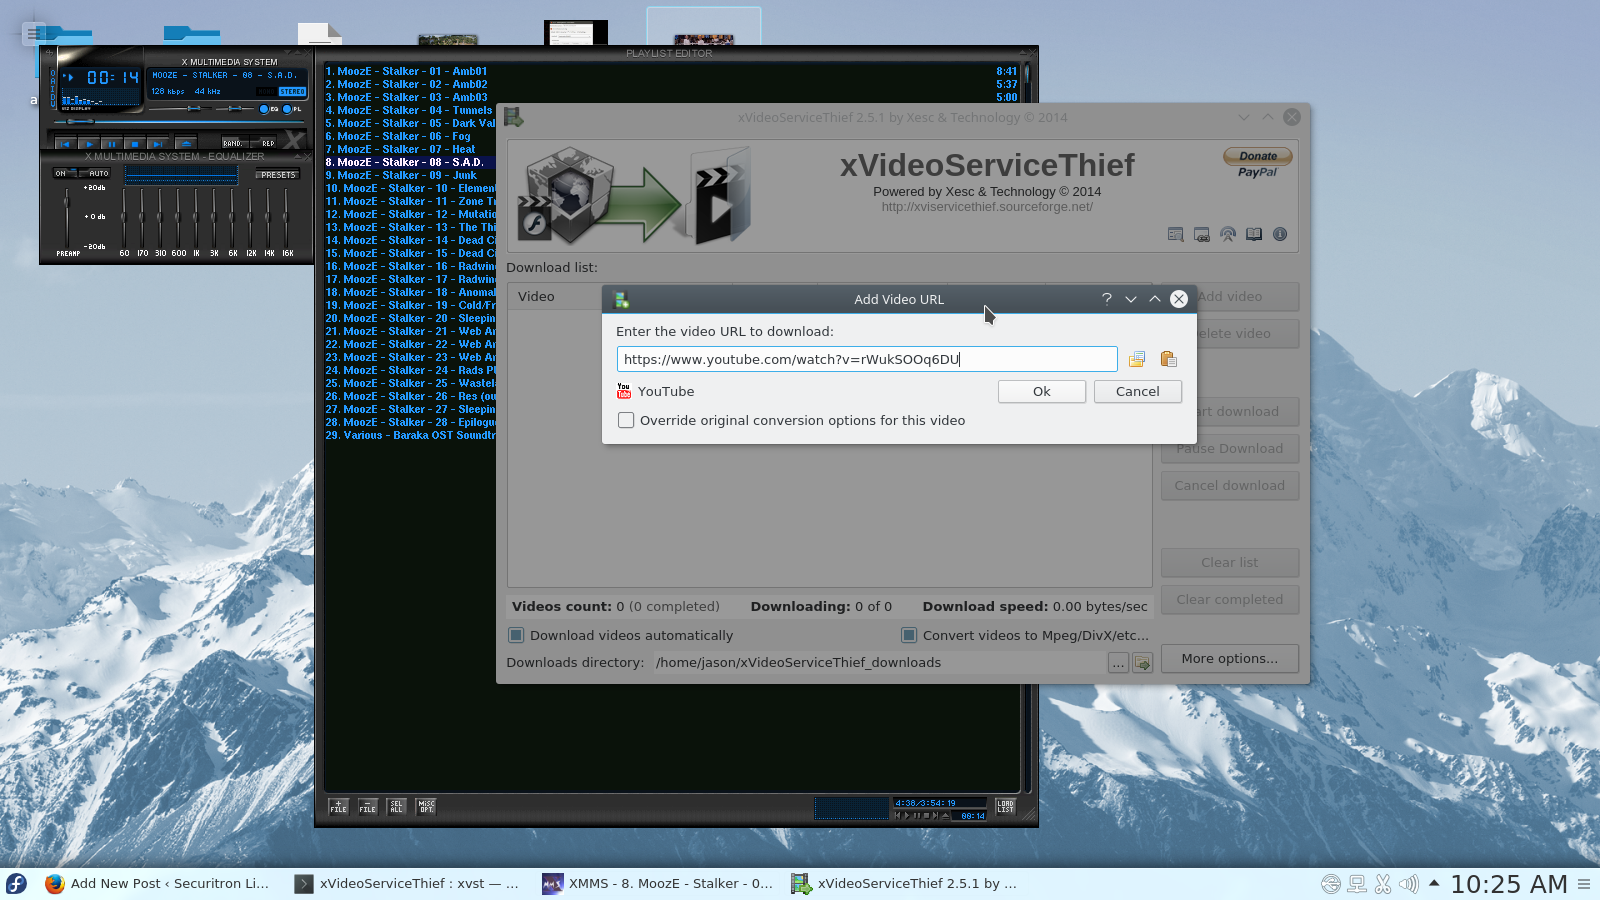 Download xvideoservicethief ubuntu 14.04 Xvideoservicethief